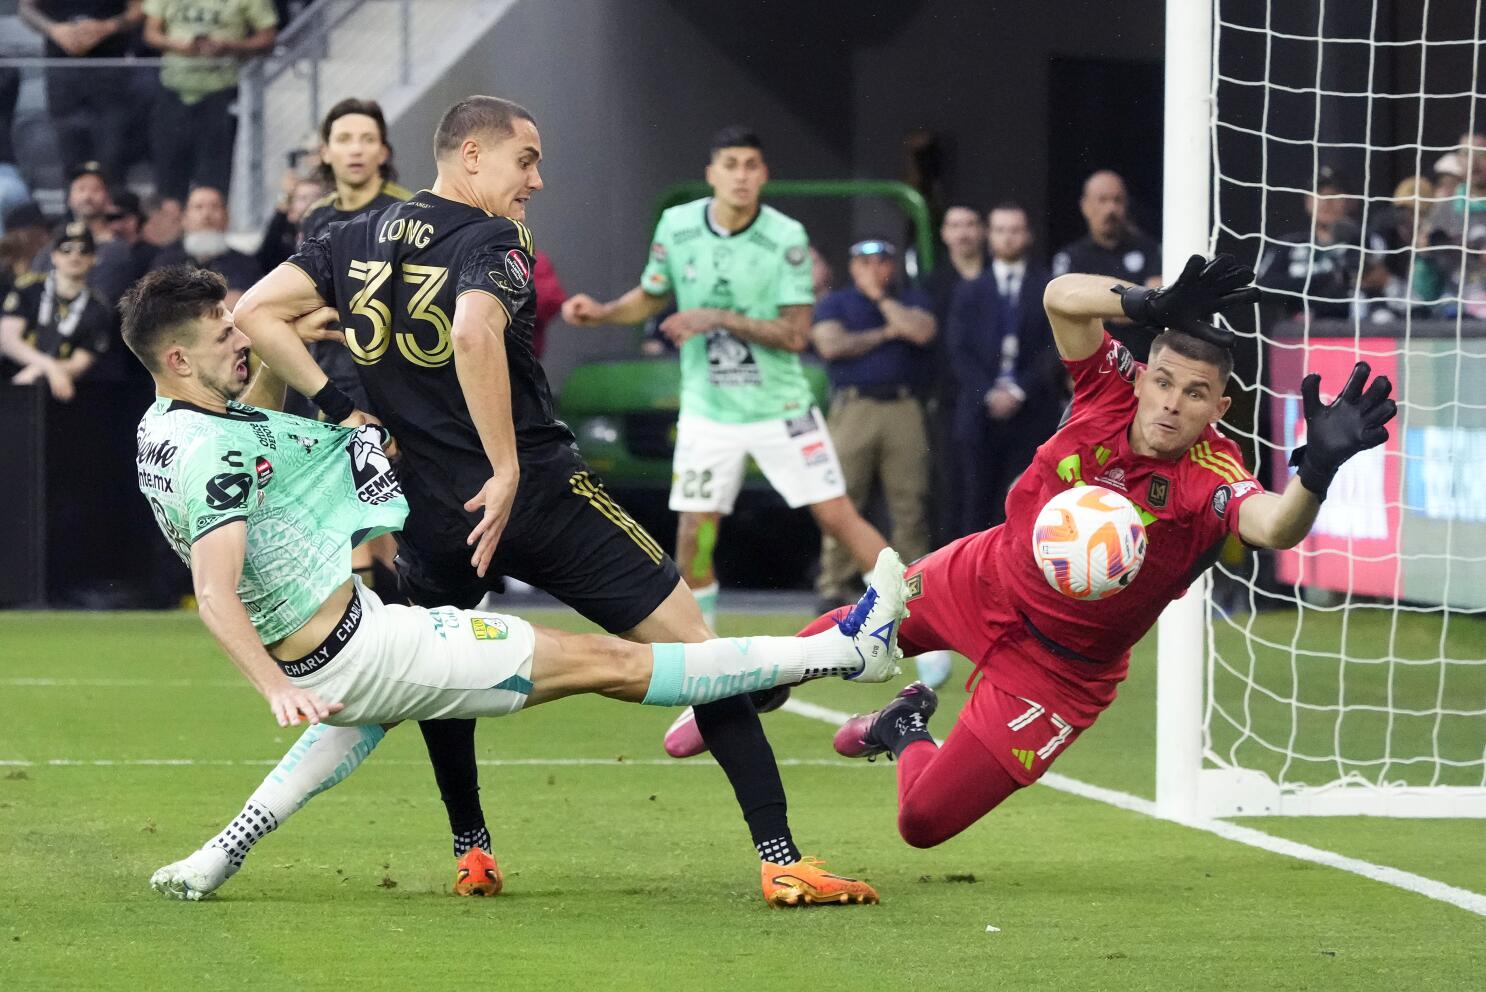 LAFC Heads to Champions League Final after 3-0 Win Over